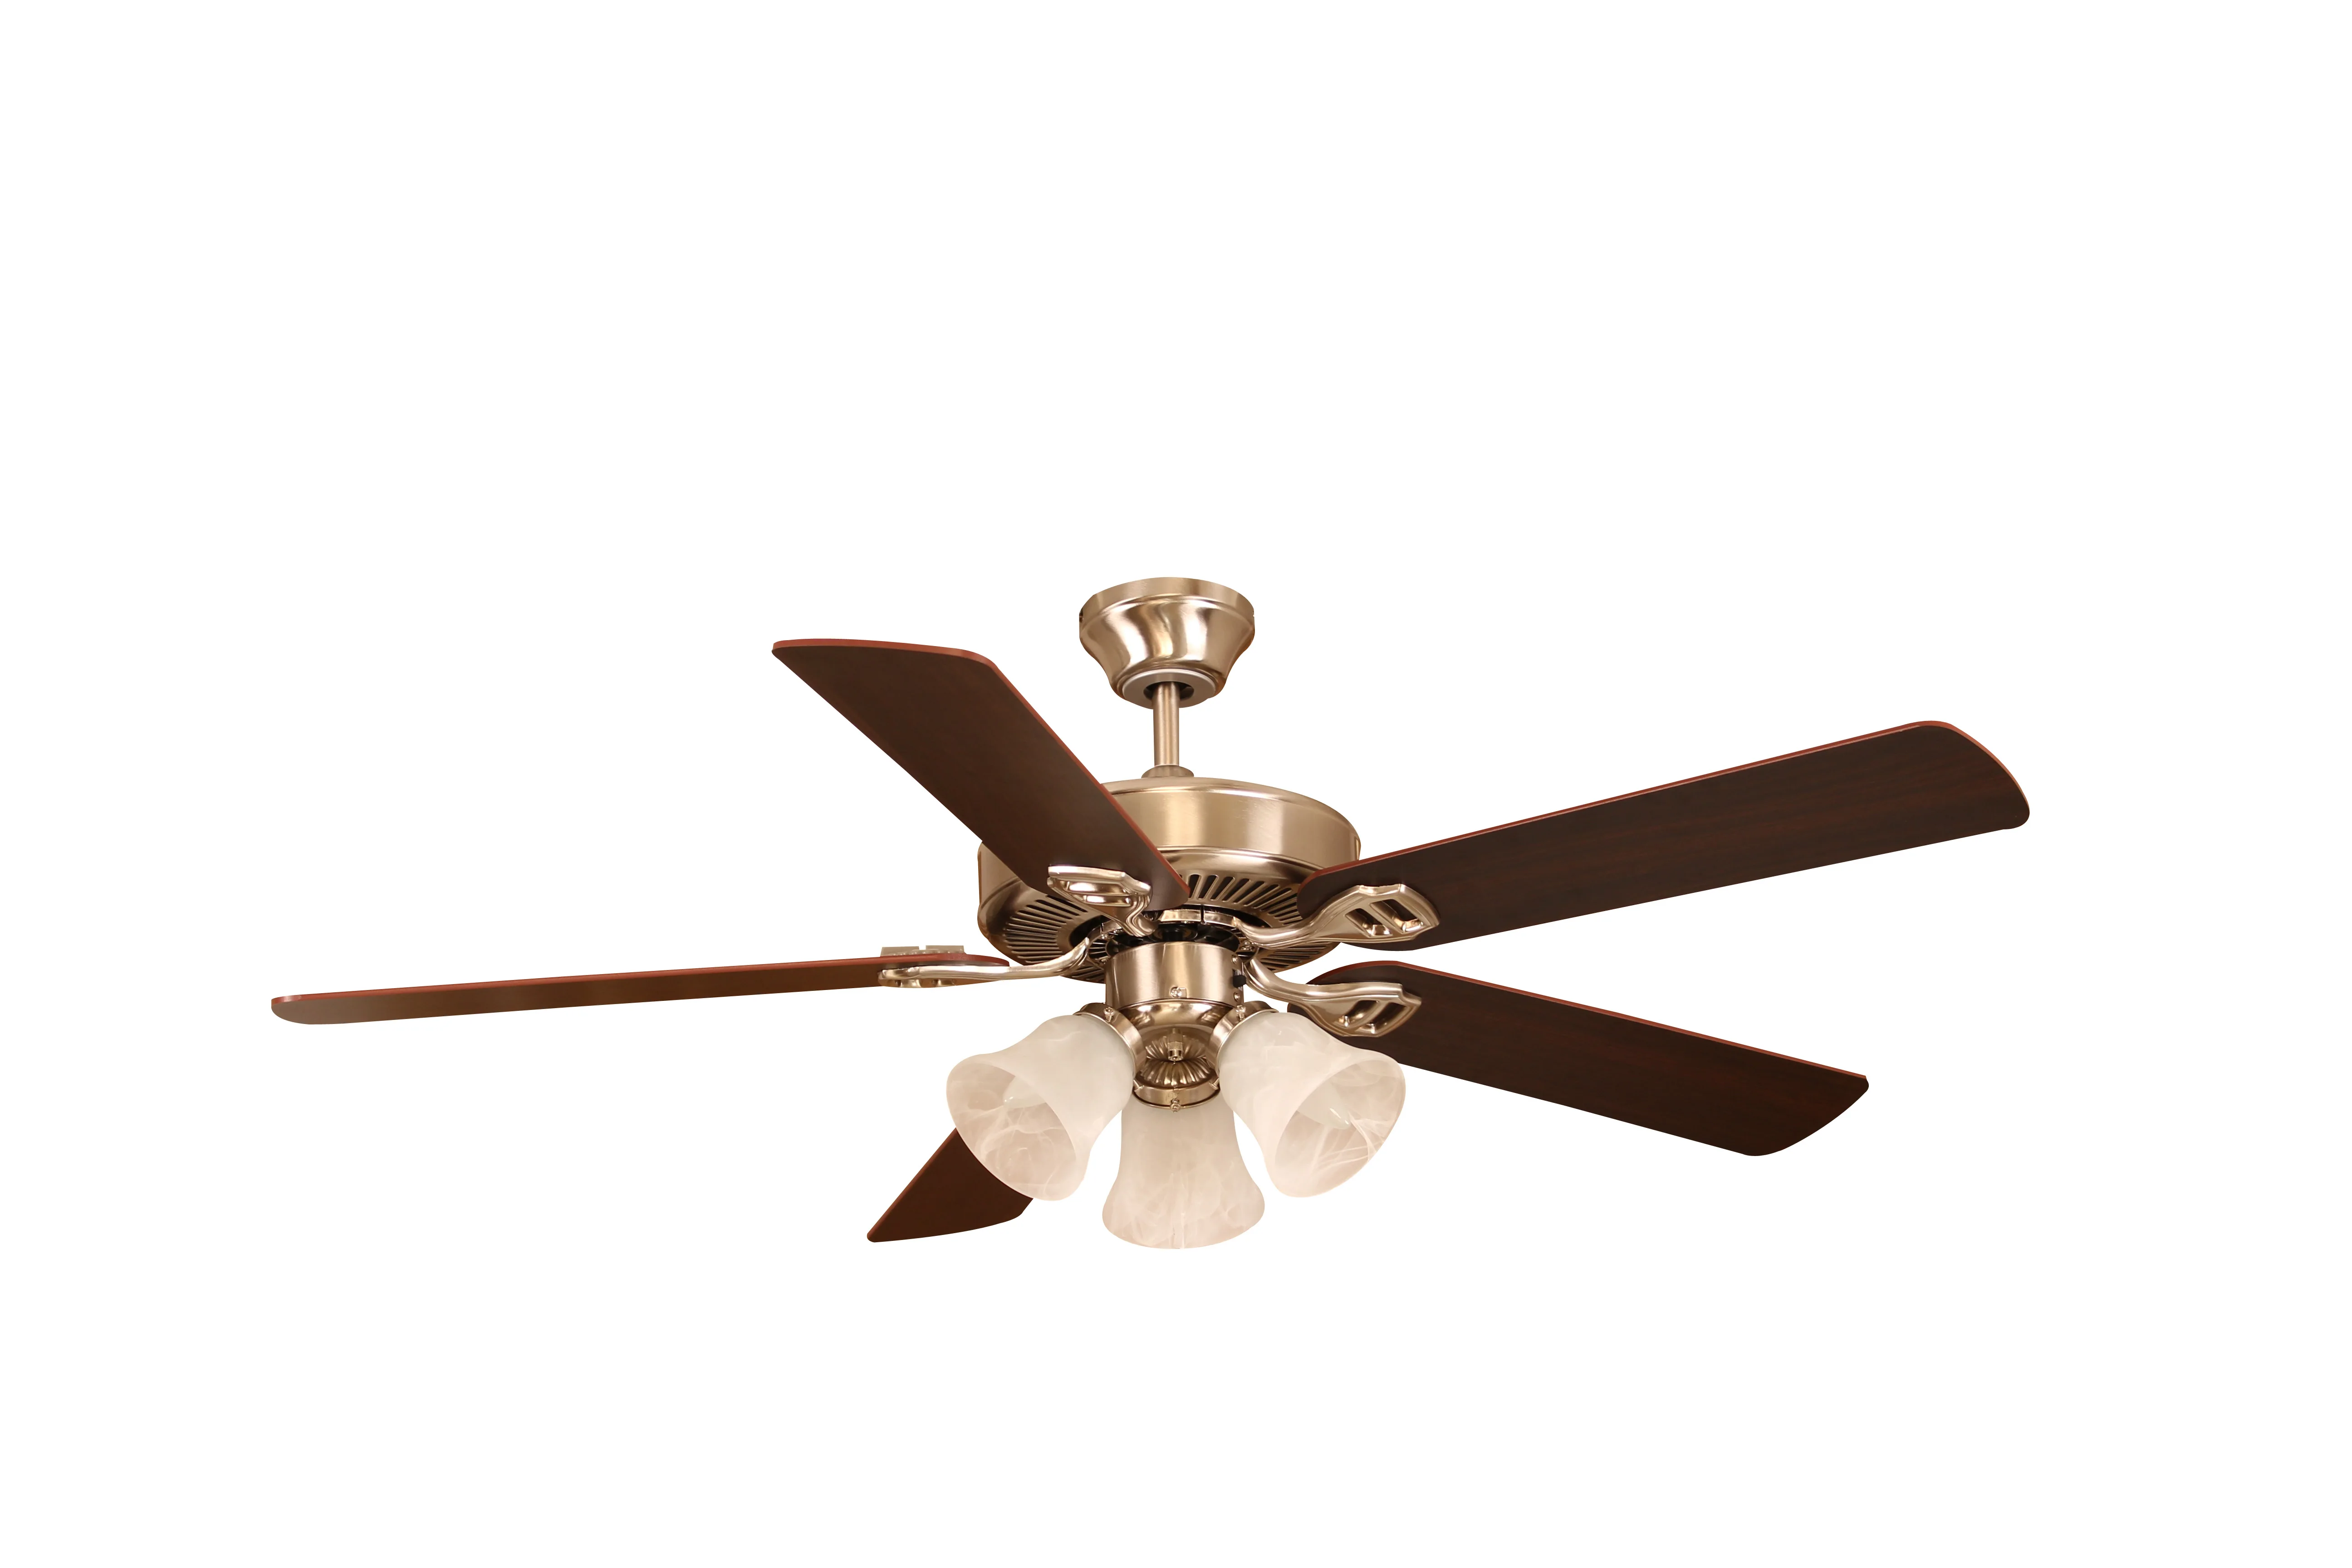 Patented Technology Export Worldwide 5 Blade Ceiling Fan With Light Price Buy Bathroom Ceiling Fan With Light